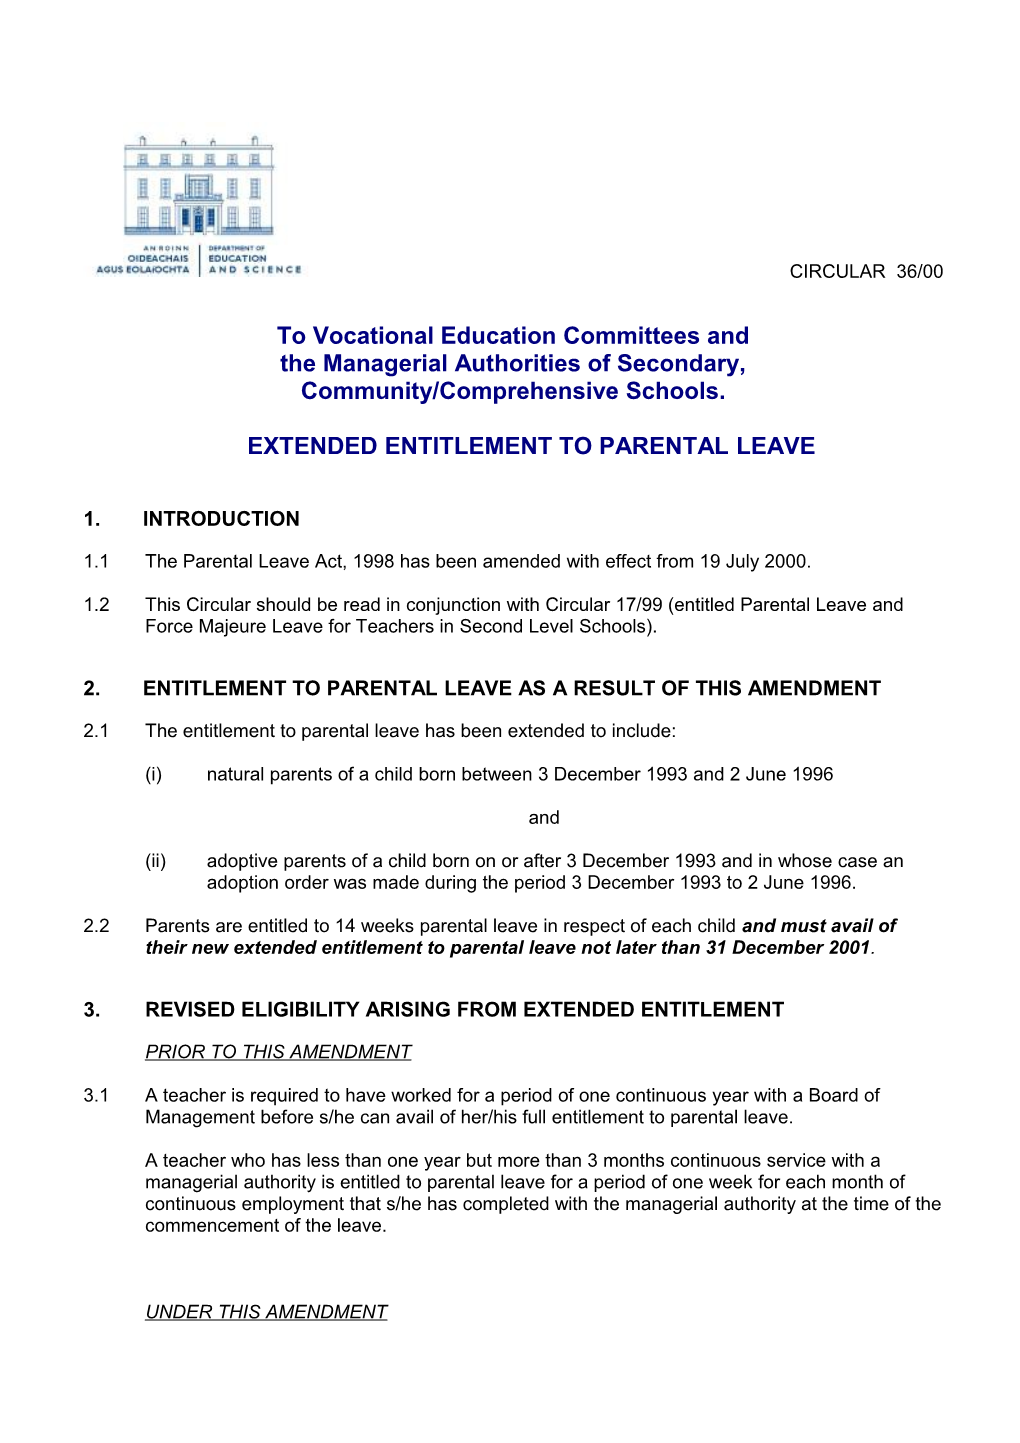 Post Primary Circular 36/00 Limited Extension of Entitlement to Parental Leave (File Word